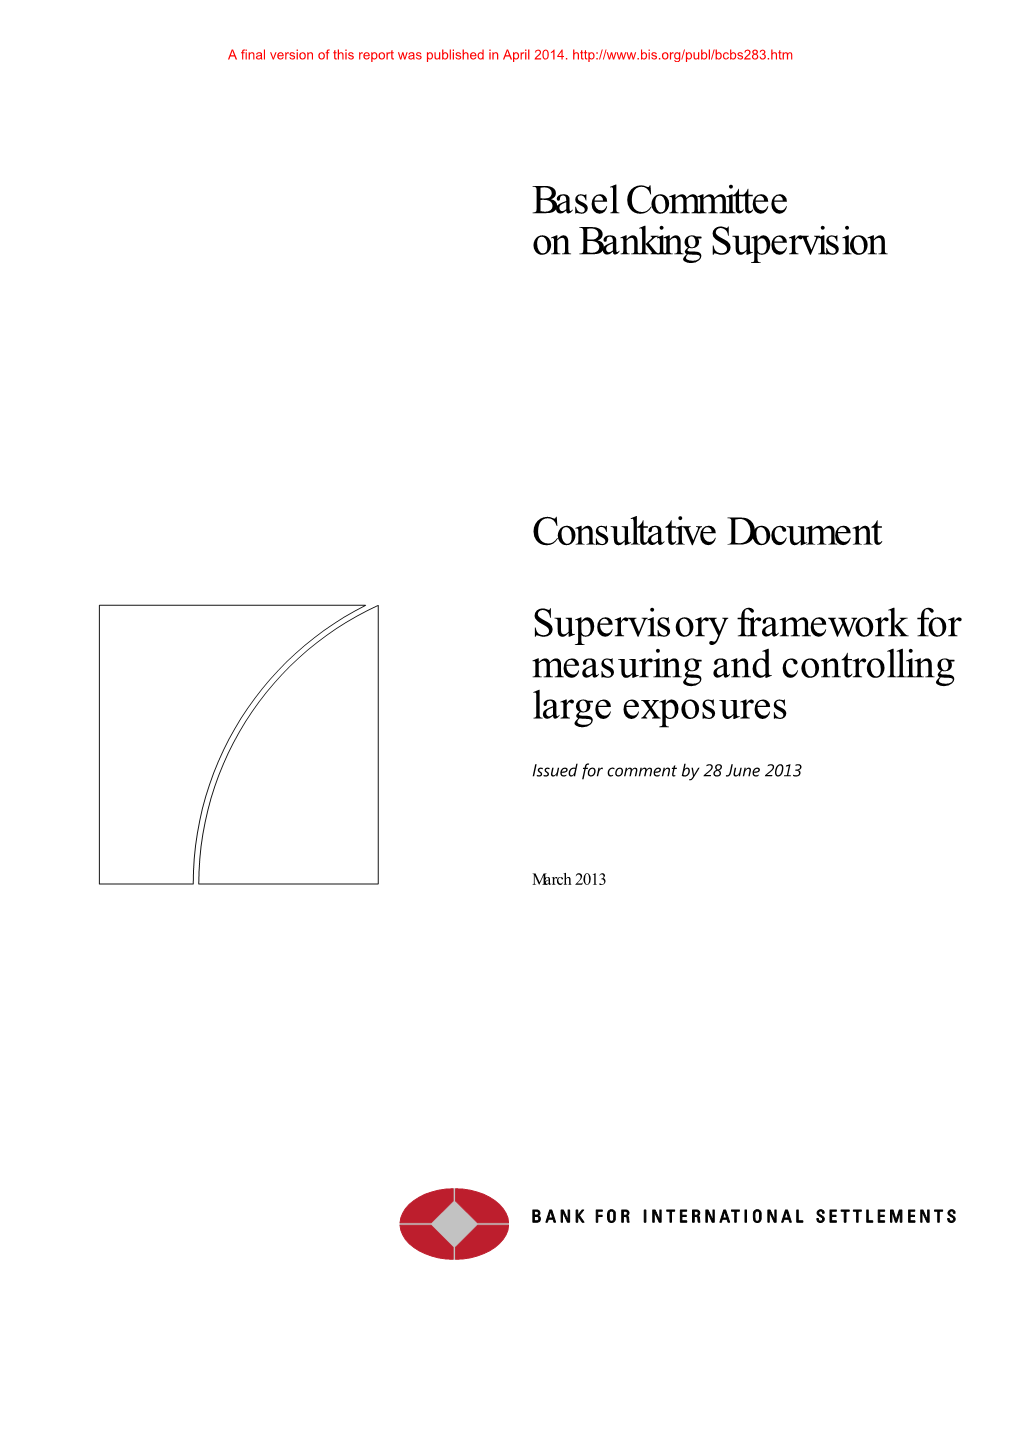 Consultative Document: Supervisory Framework for Measuring and Controlling Large Exposures